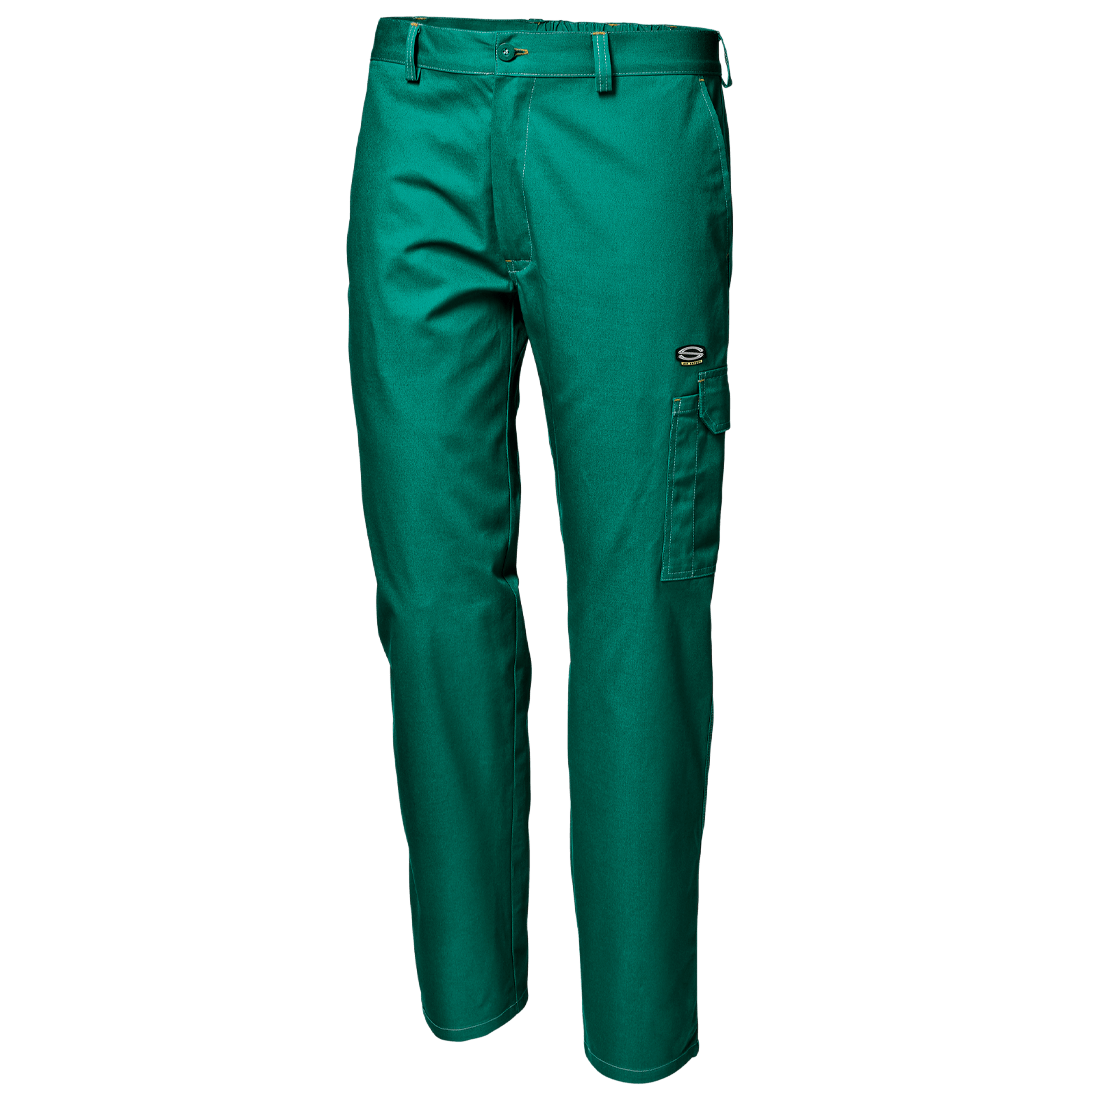 SYMBOL TROUSERS W/BANDS | Sir Safety System